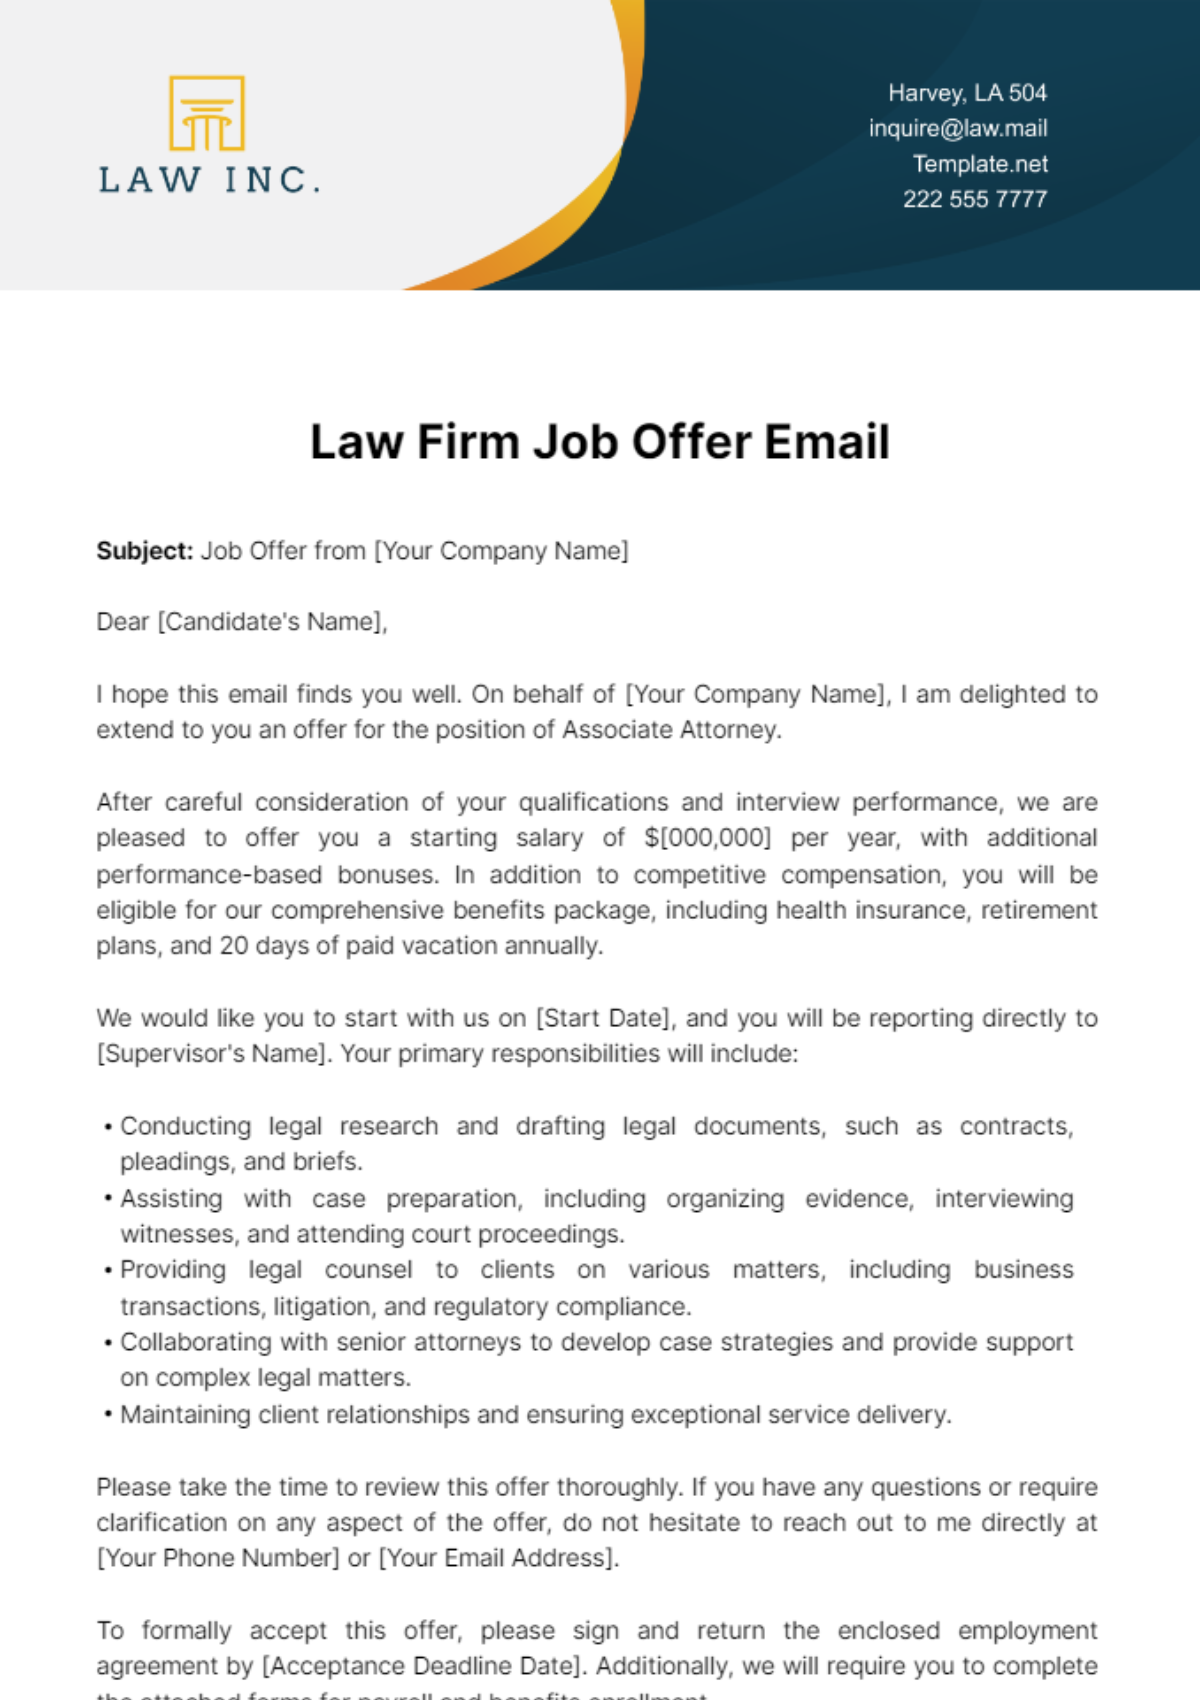 Free Law Firm Job Offer Email Template